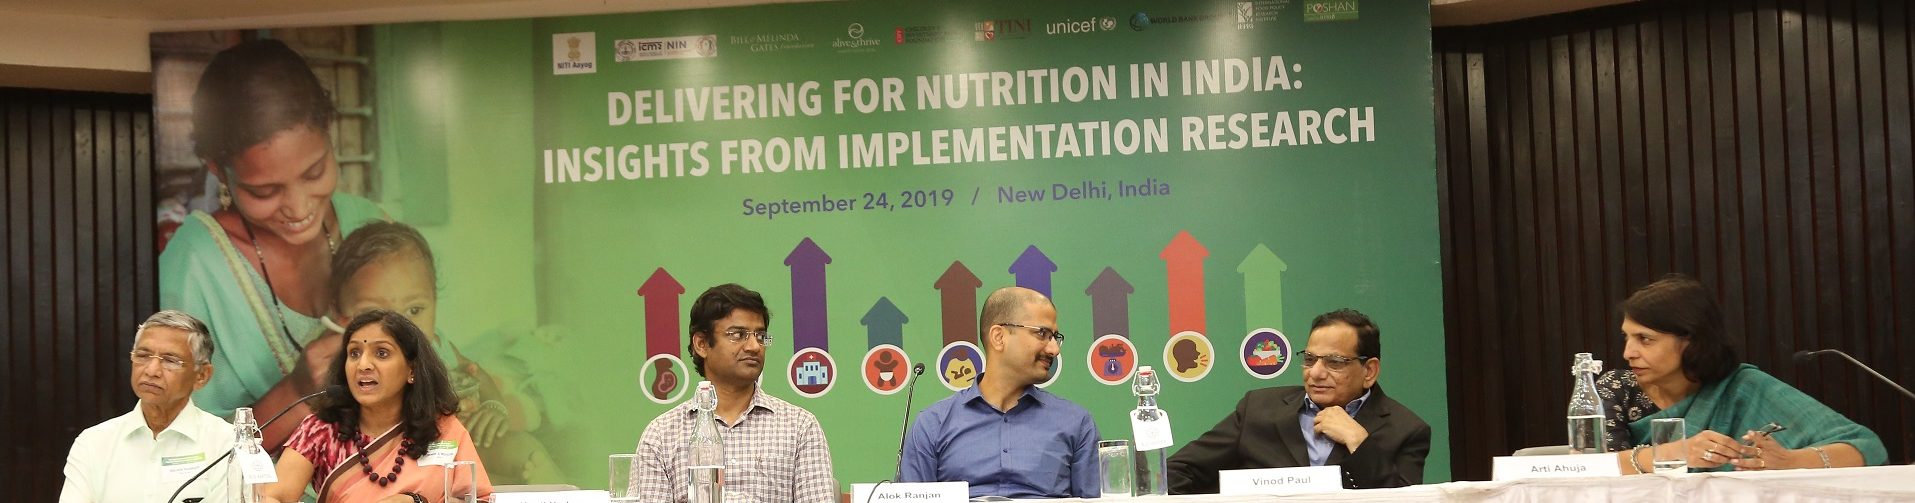 Researchers Gather to Support India’s Nutrition Mission with Insights from Implementation Research